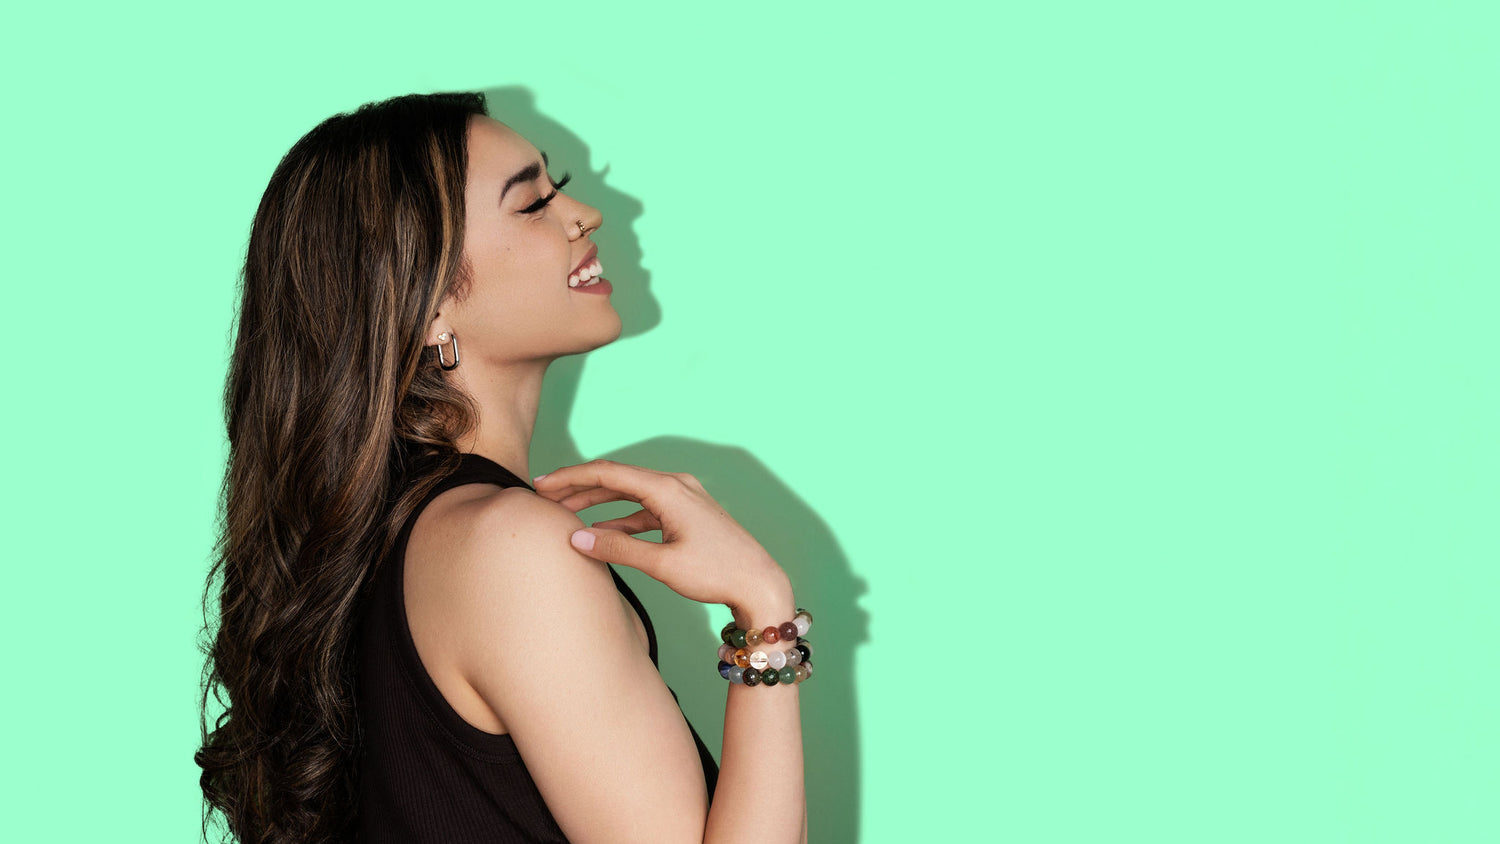 A woman with long dark hair is laughing. She wears a black tank top and is turned to the side and faces to the right. On her wrist she wears several multicoloured crystal gemstone bracelets. The background is a bright green.